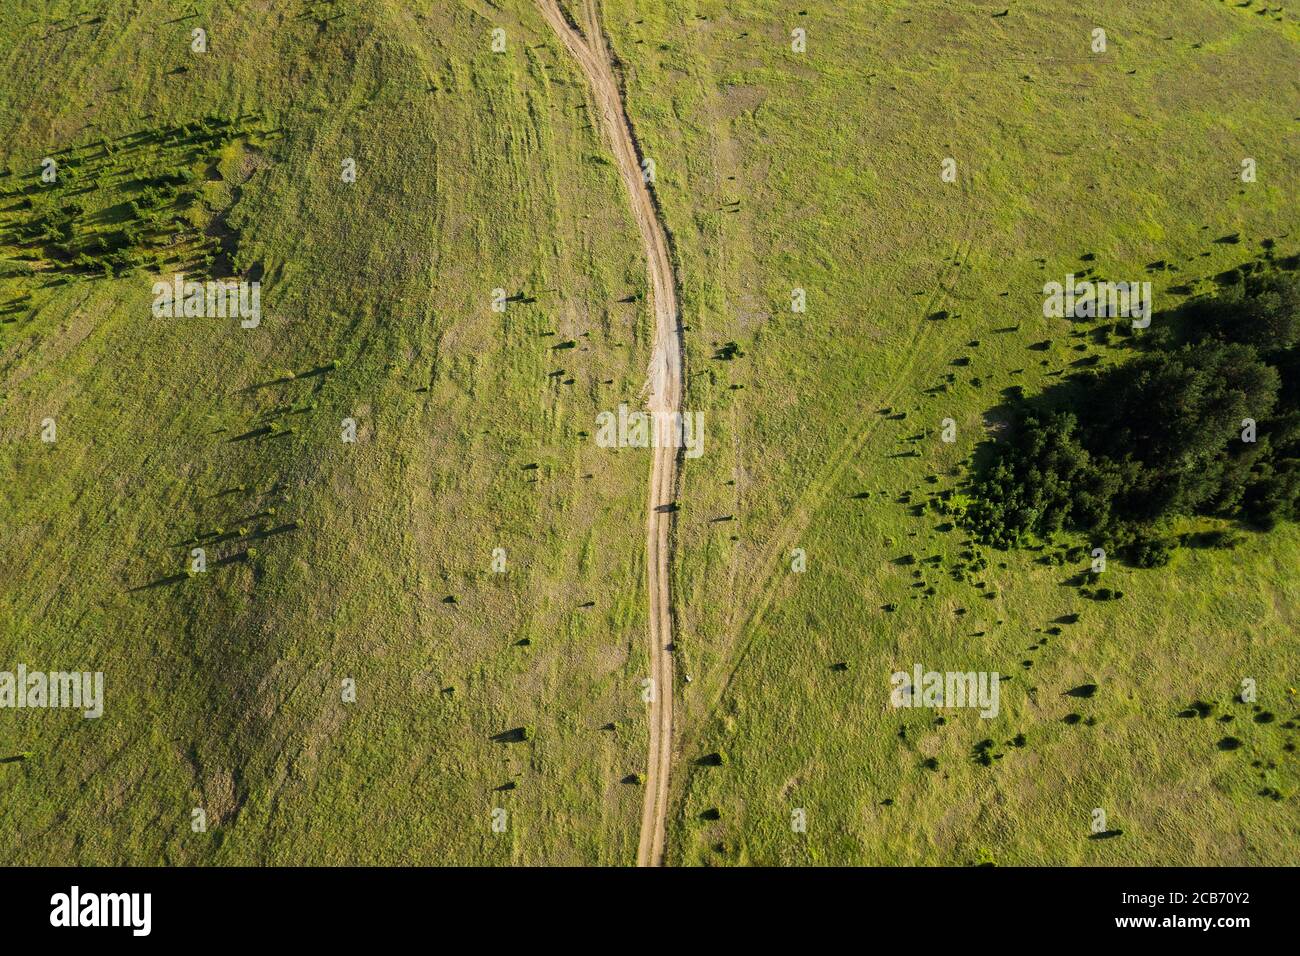 Aerial view of a dirt road going through mountain planes Stock Photo